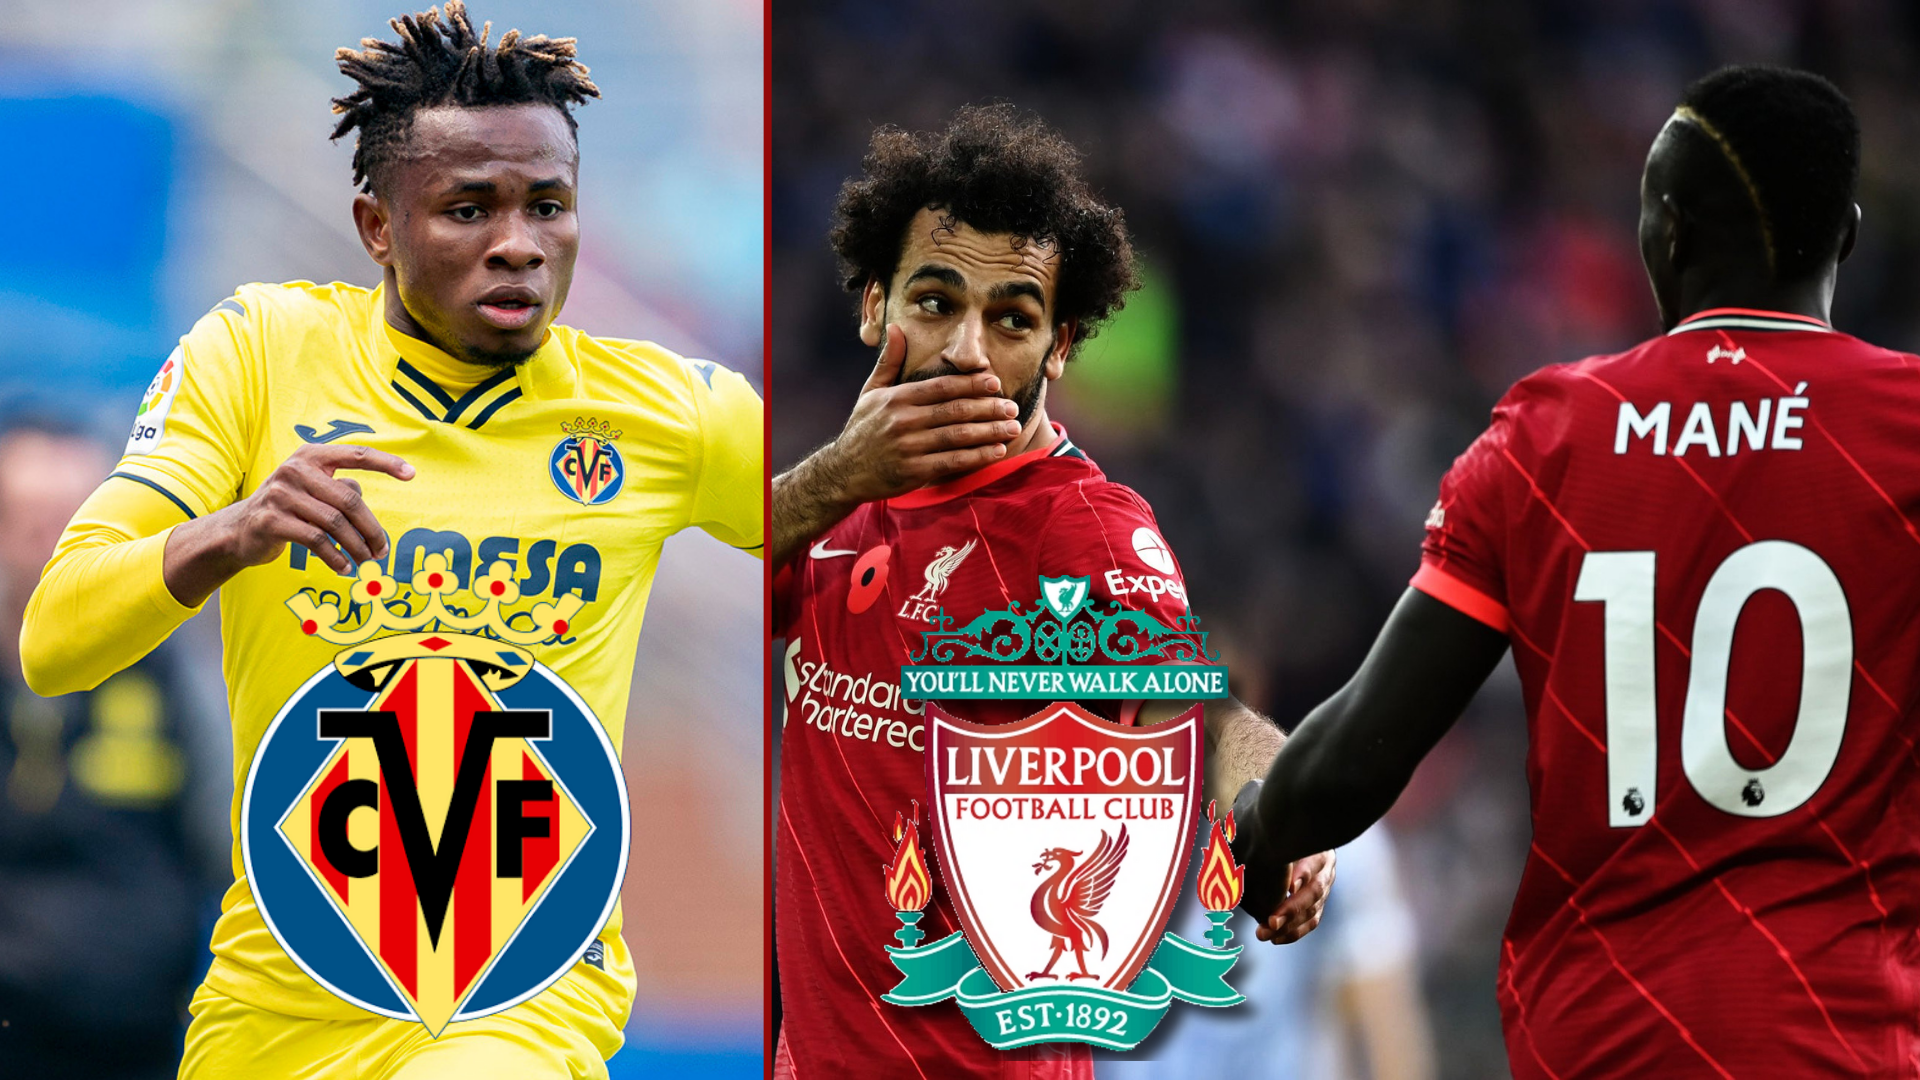 Chukwueze starts from the bench  for Villarreal as Salah, Mane, and Keita start for Liverpool